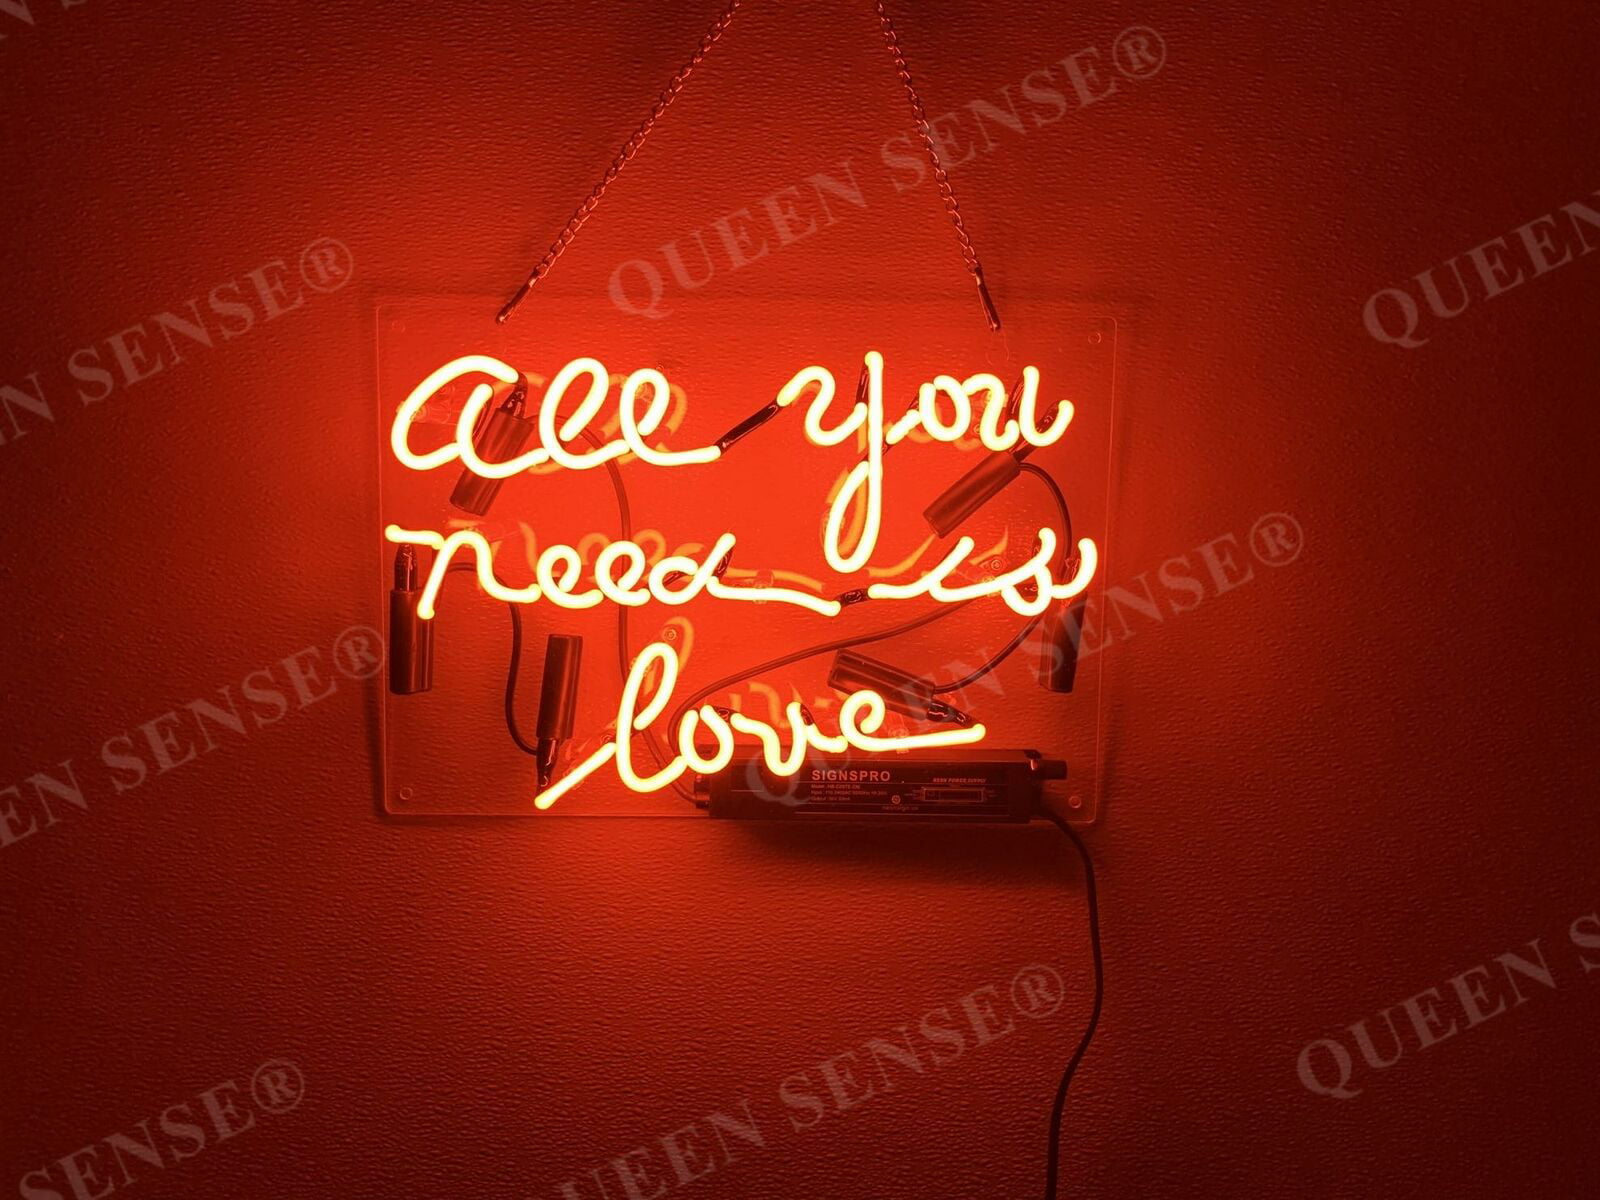 New Do What You Love Acrylic Neon Sign Light Lamp 14"x10" 